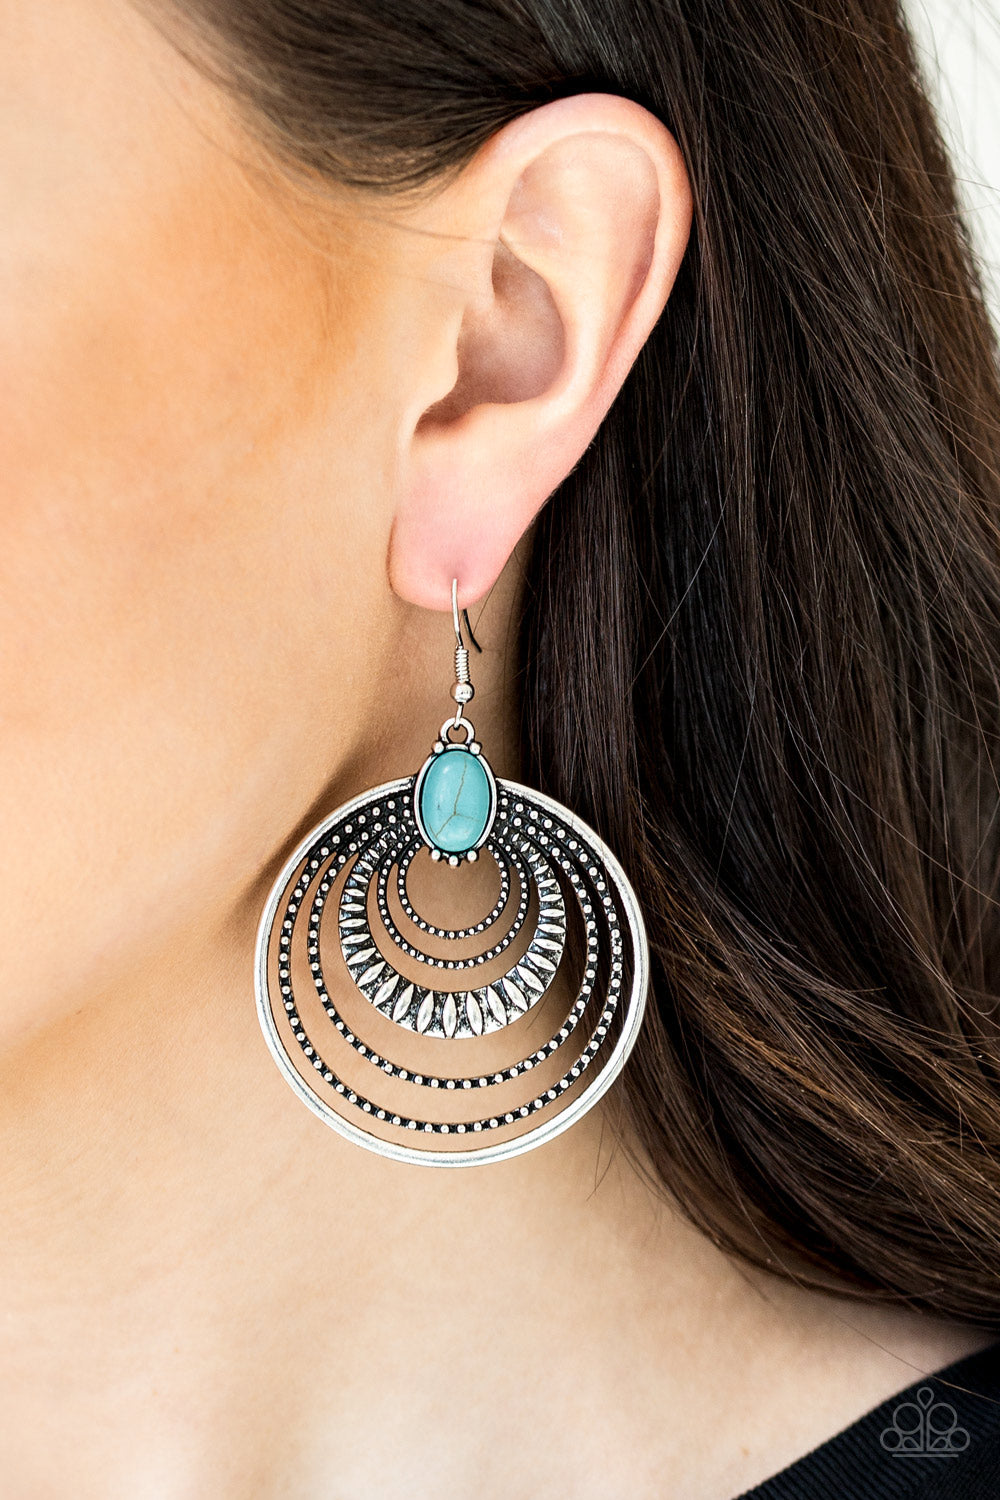 Paparazzi Accessories - Southern Sol - Blue Earrings